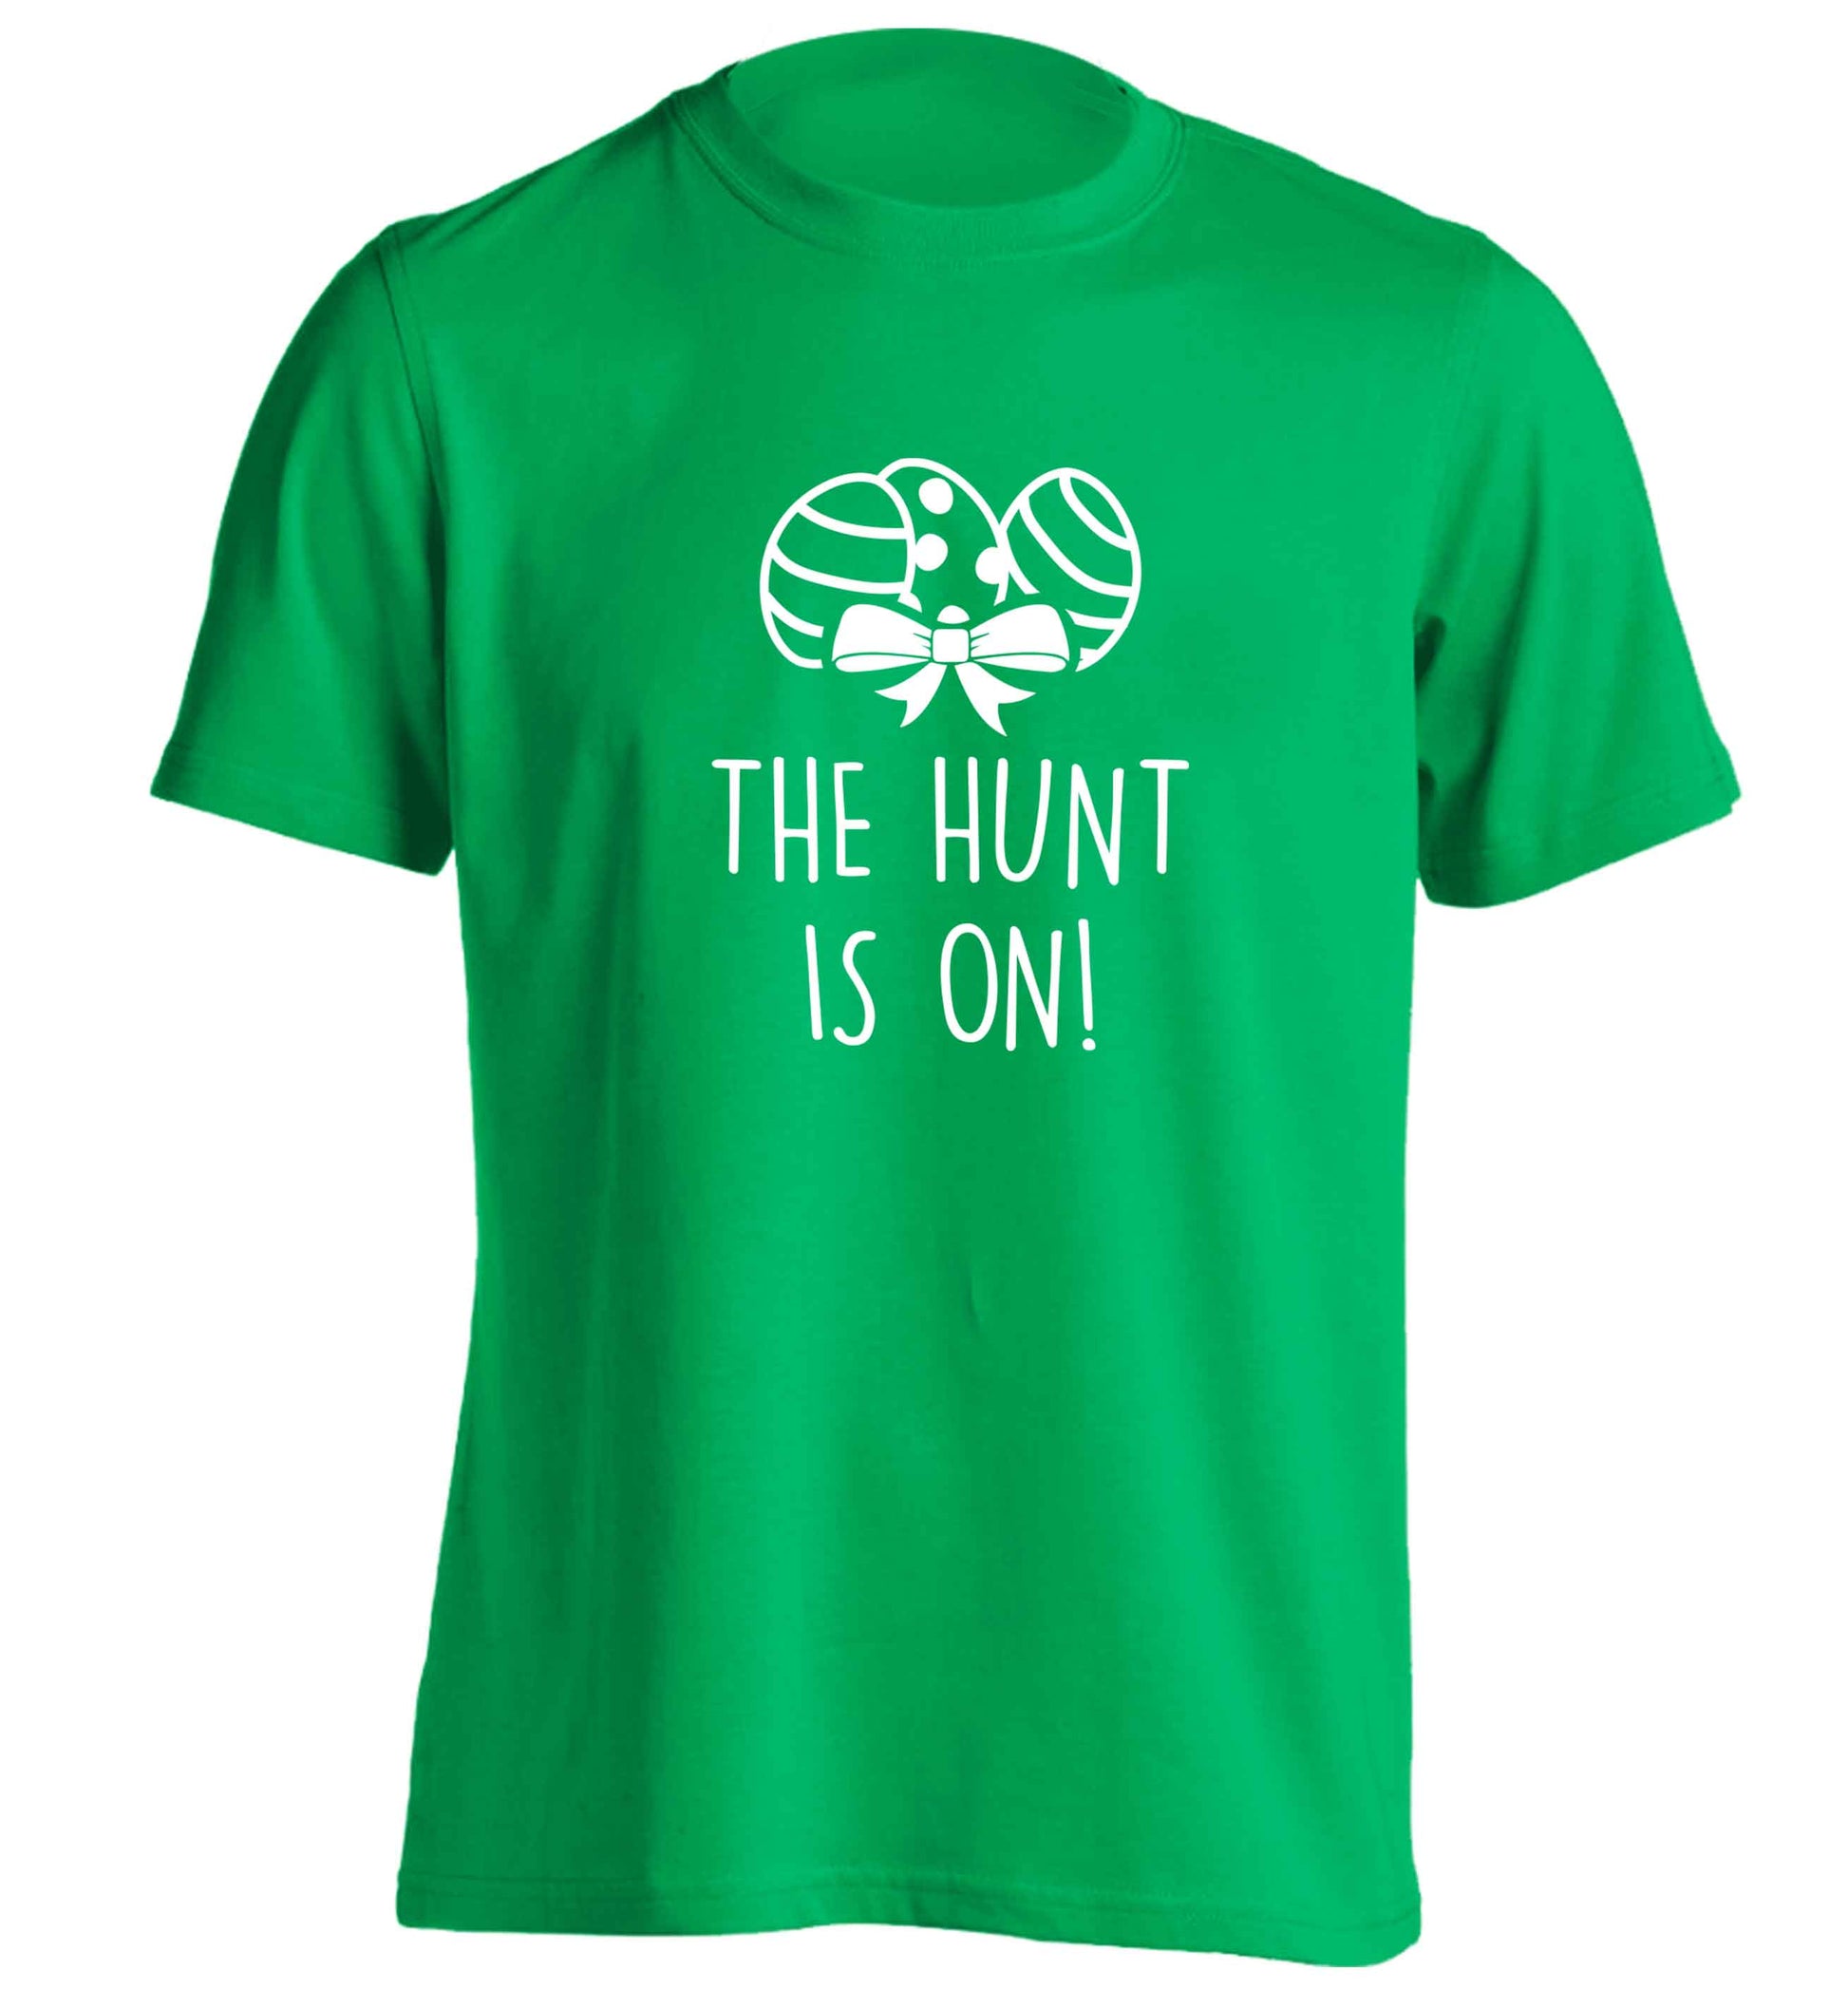 The hunt is on adults unisex green Tshirt 2XL